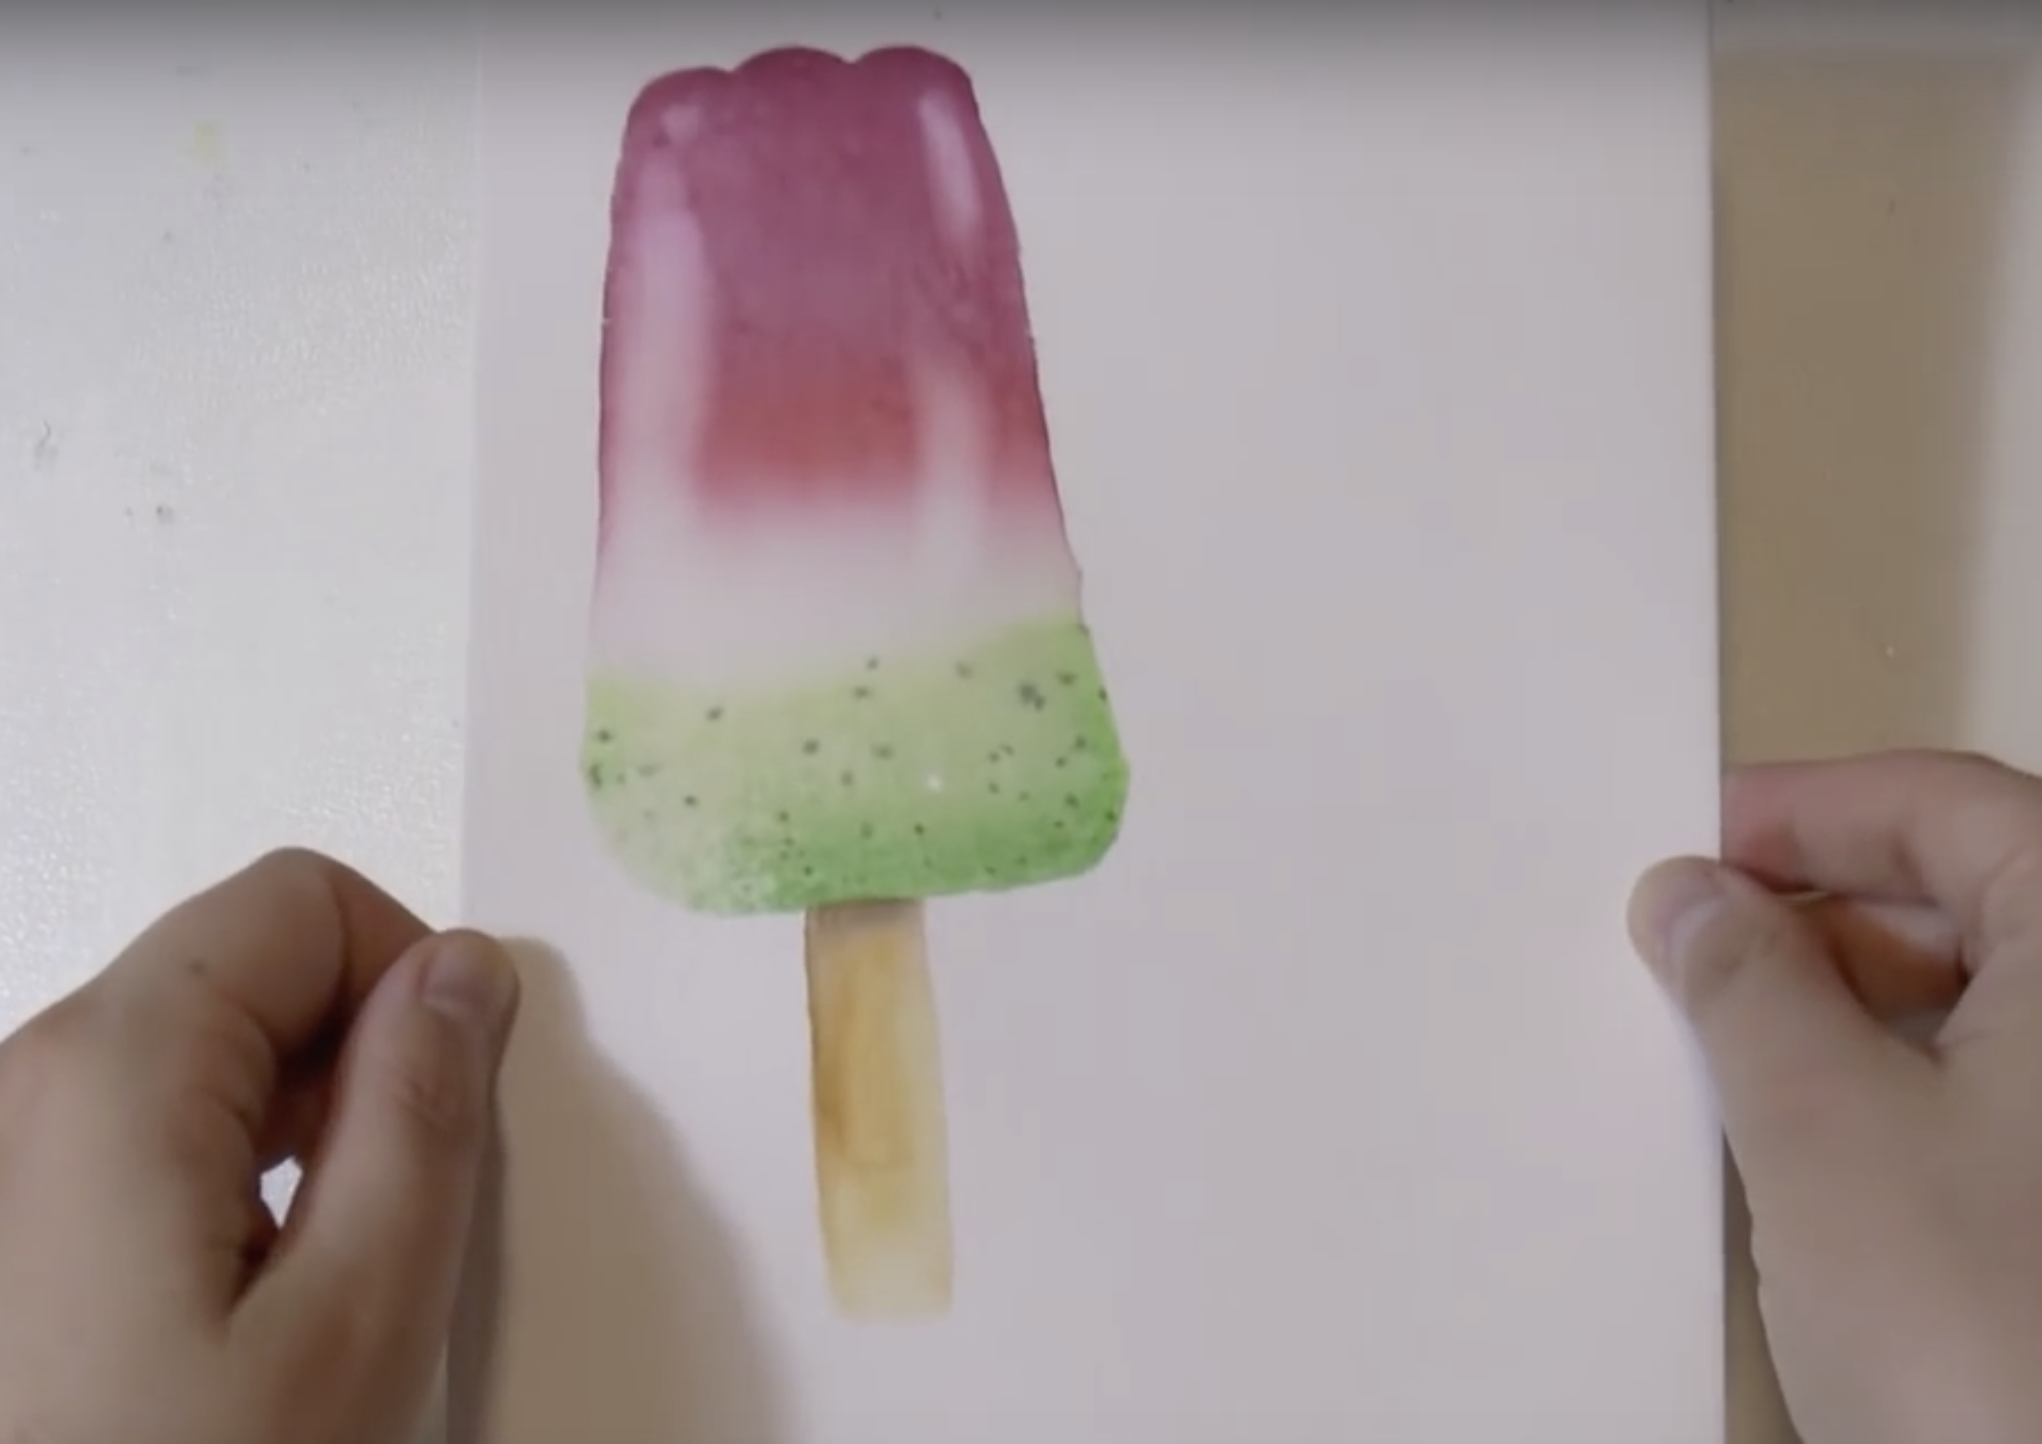 easy-watercolor-ideas-techniques-how-to-paint-a-watercolor-popsicle - Step 6